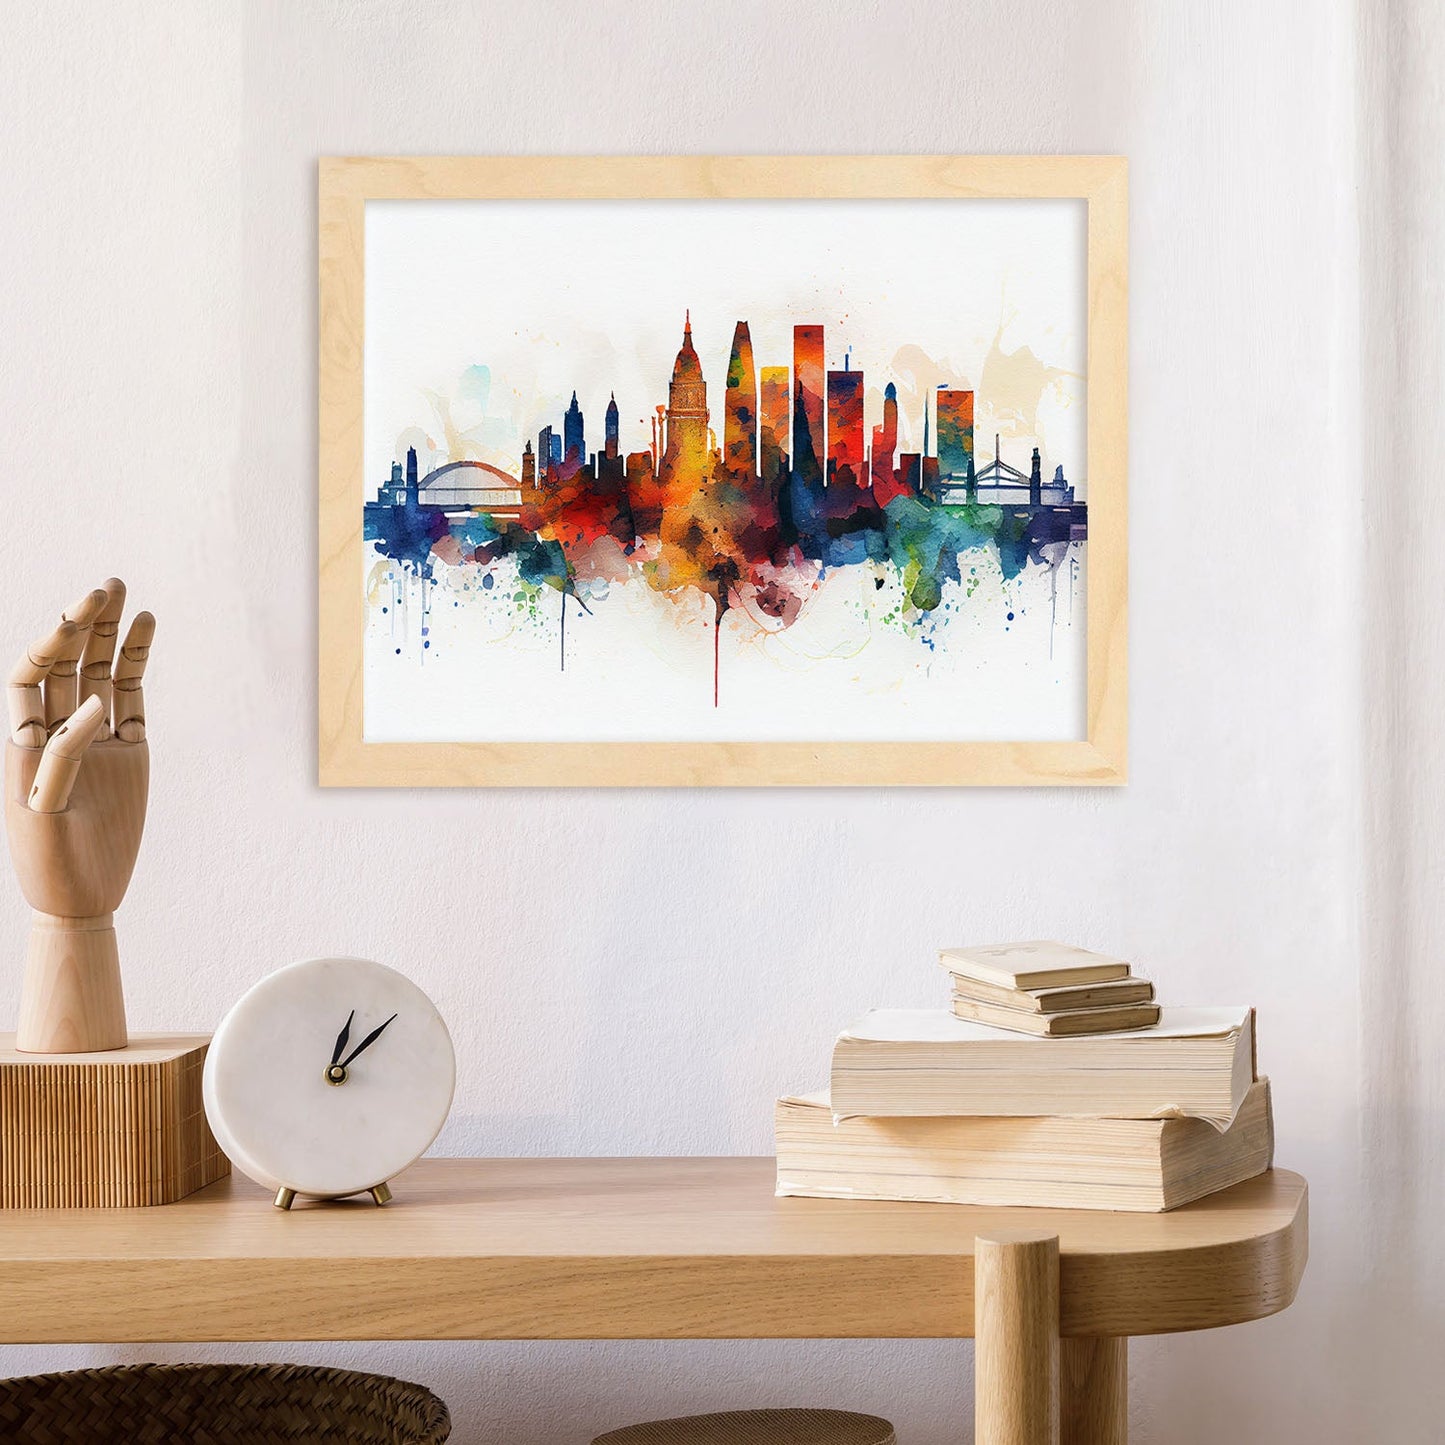 Nacnic watercolor of a skyline of the city of London_1. Aesthetic Wall Art Prints for Bedroom or Living Room Design.